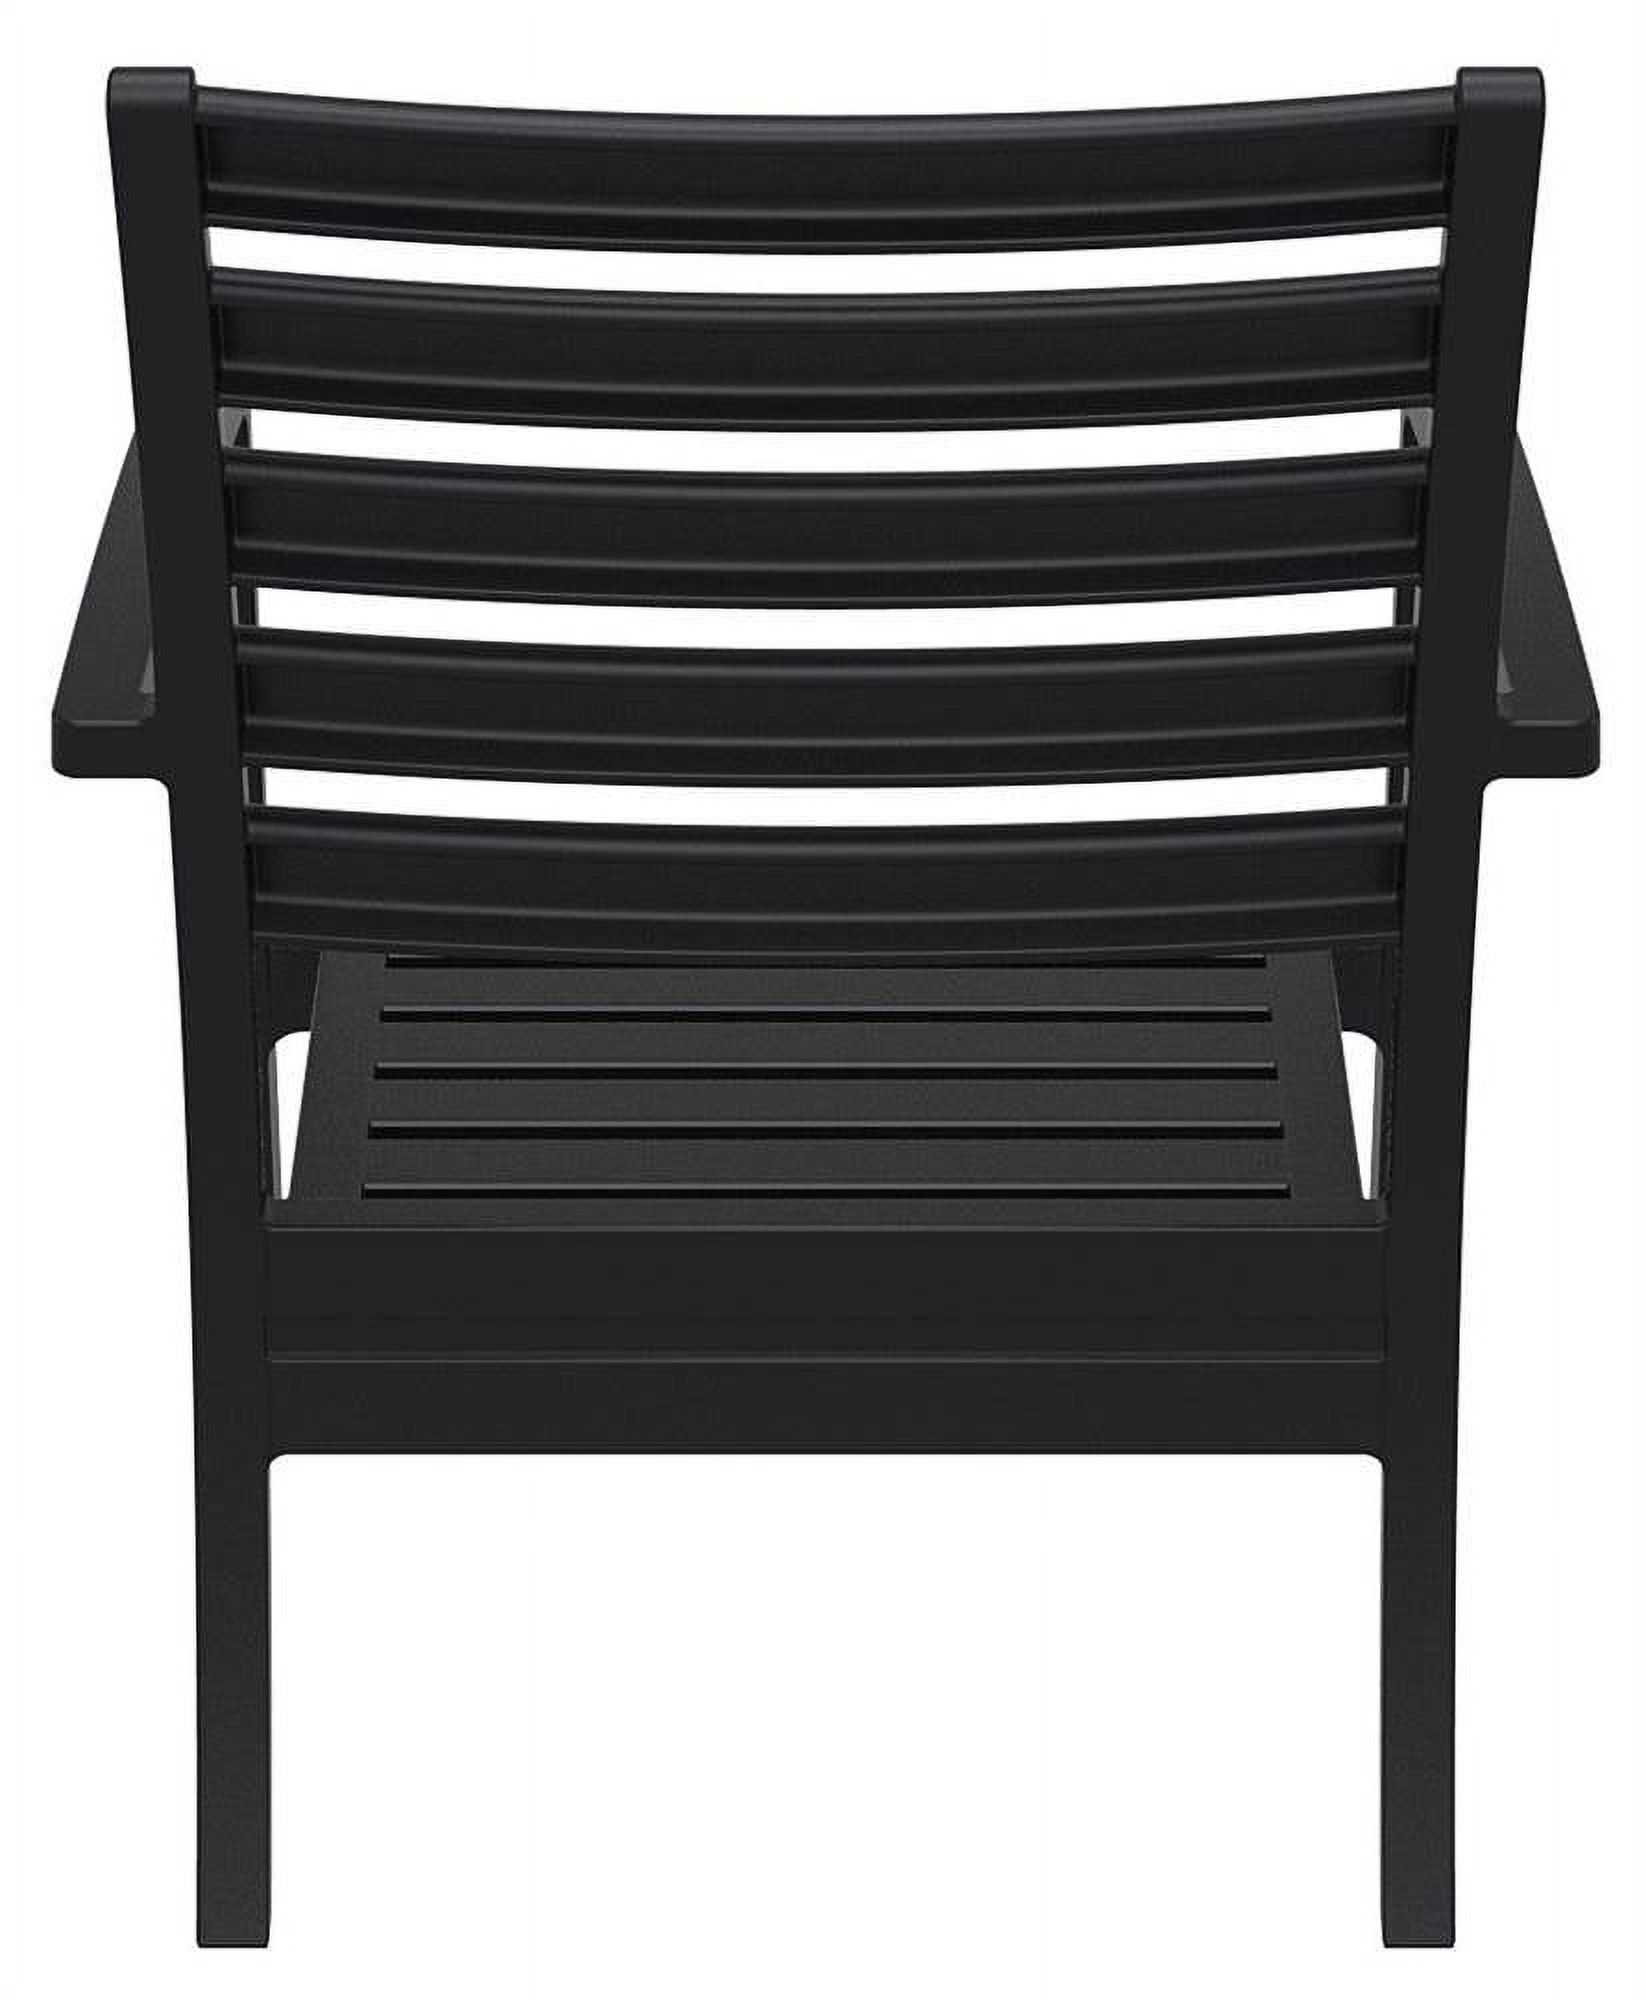 Siesta ISP004-BLA-CCH Artemis XL Outdoor Club Chair with Sunbrella Charcoal Cushion - Black -  set of 2 - image 3 of 4